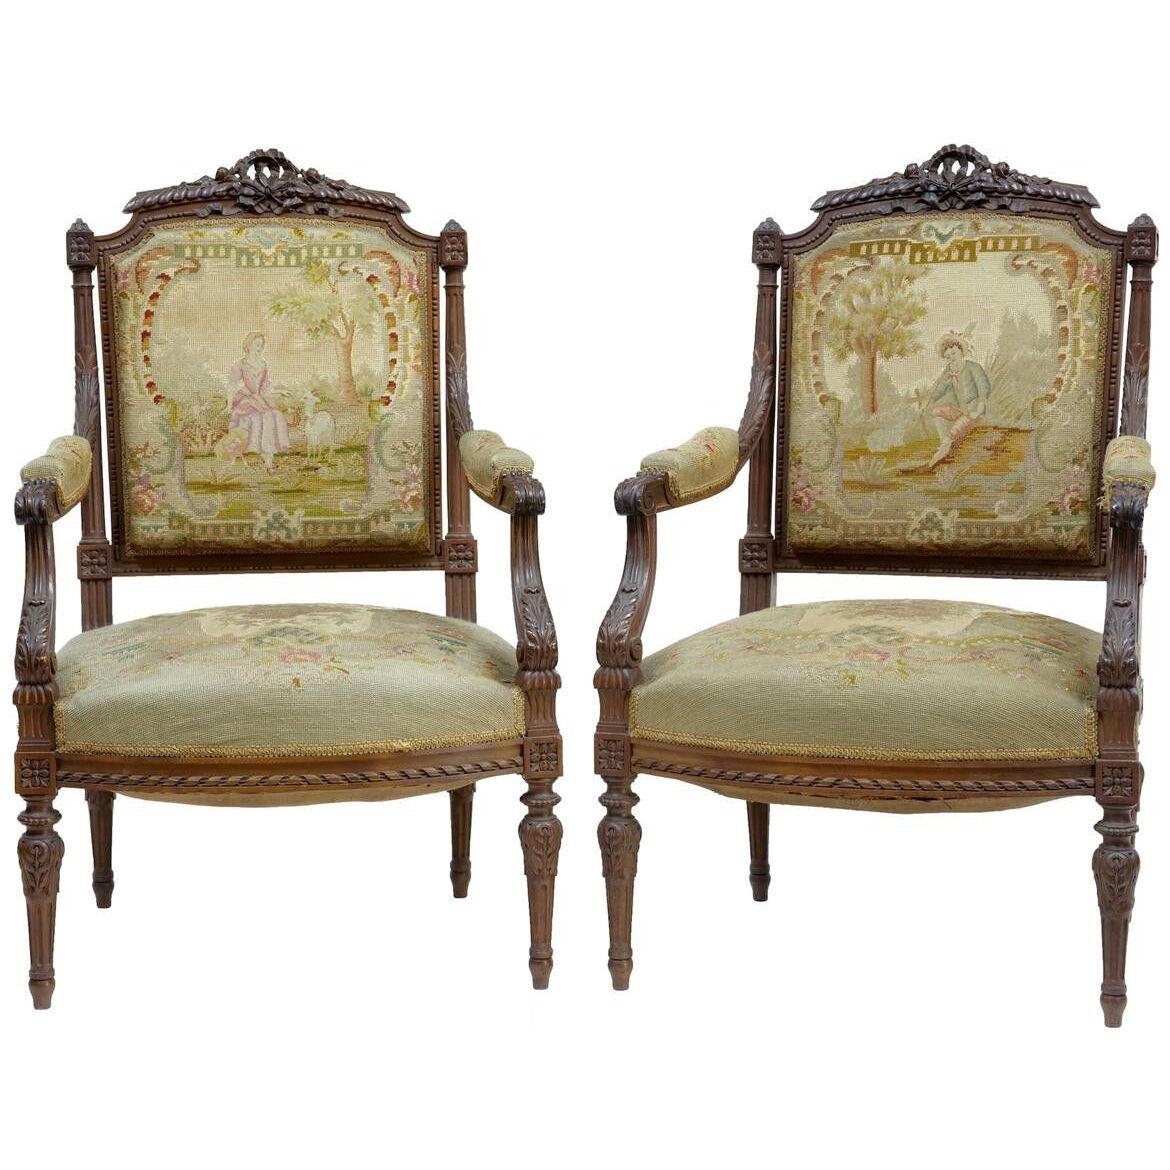 19TH CENTURY FRENCH CARVED WALNUT TAPESTRY ARMCHAIRS